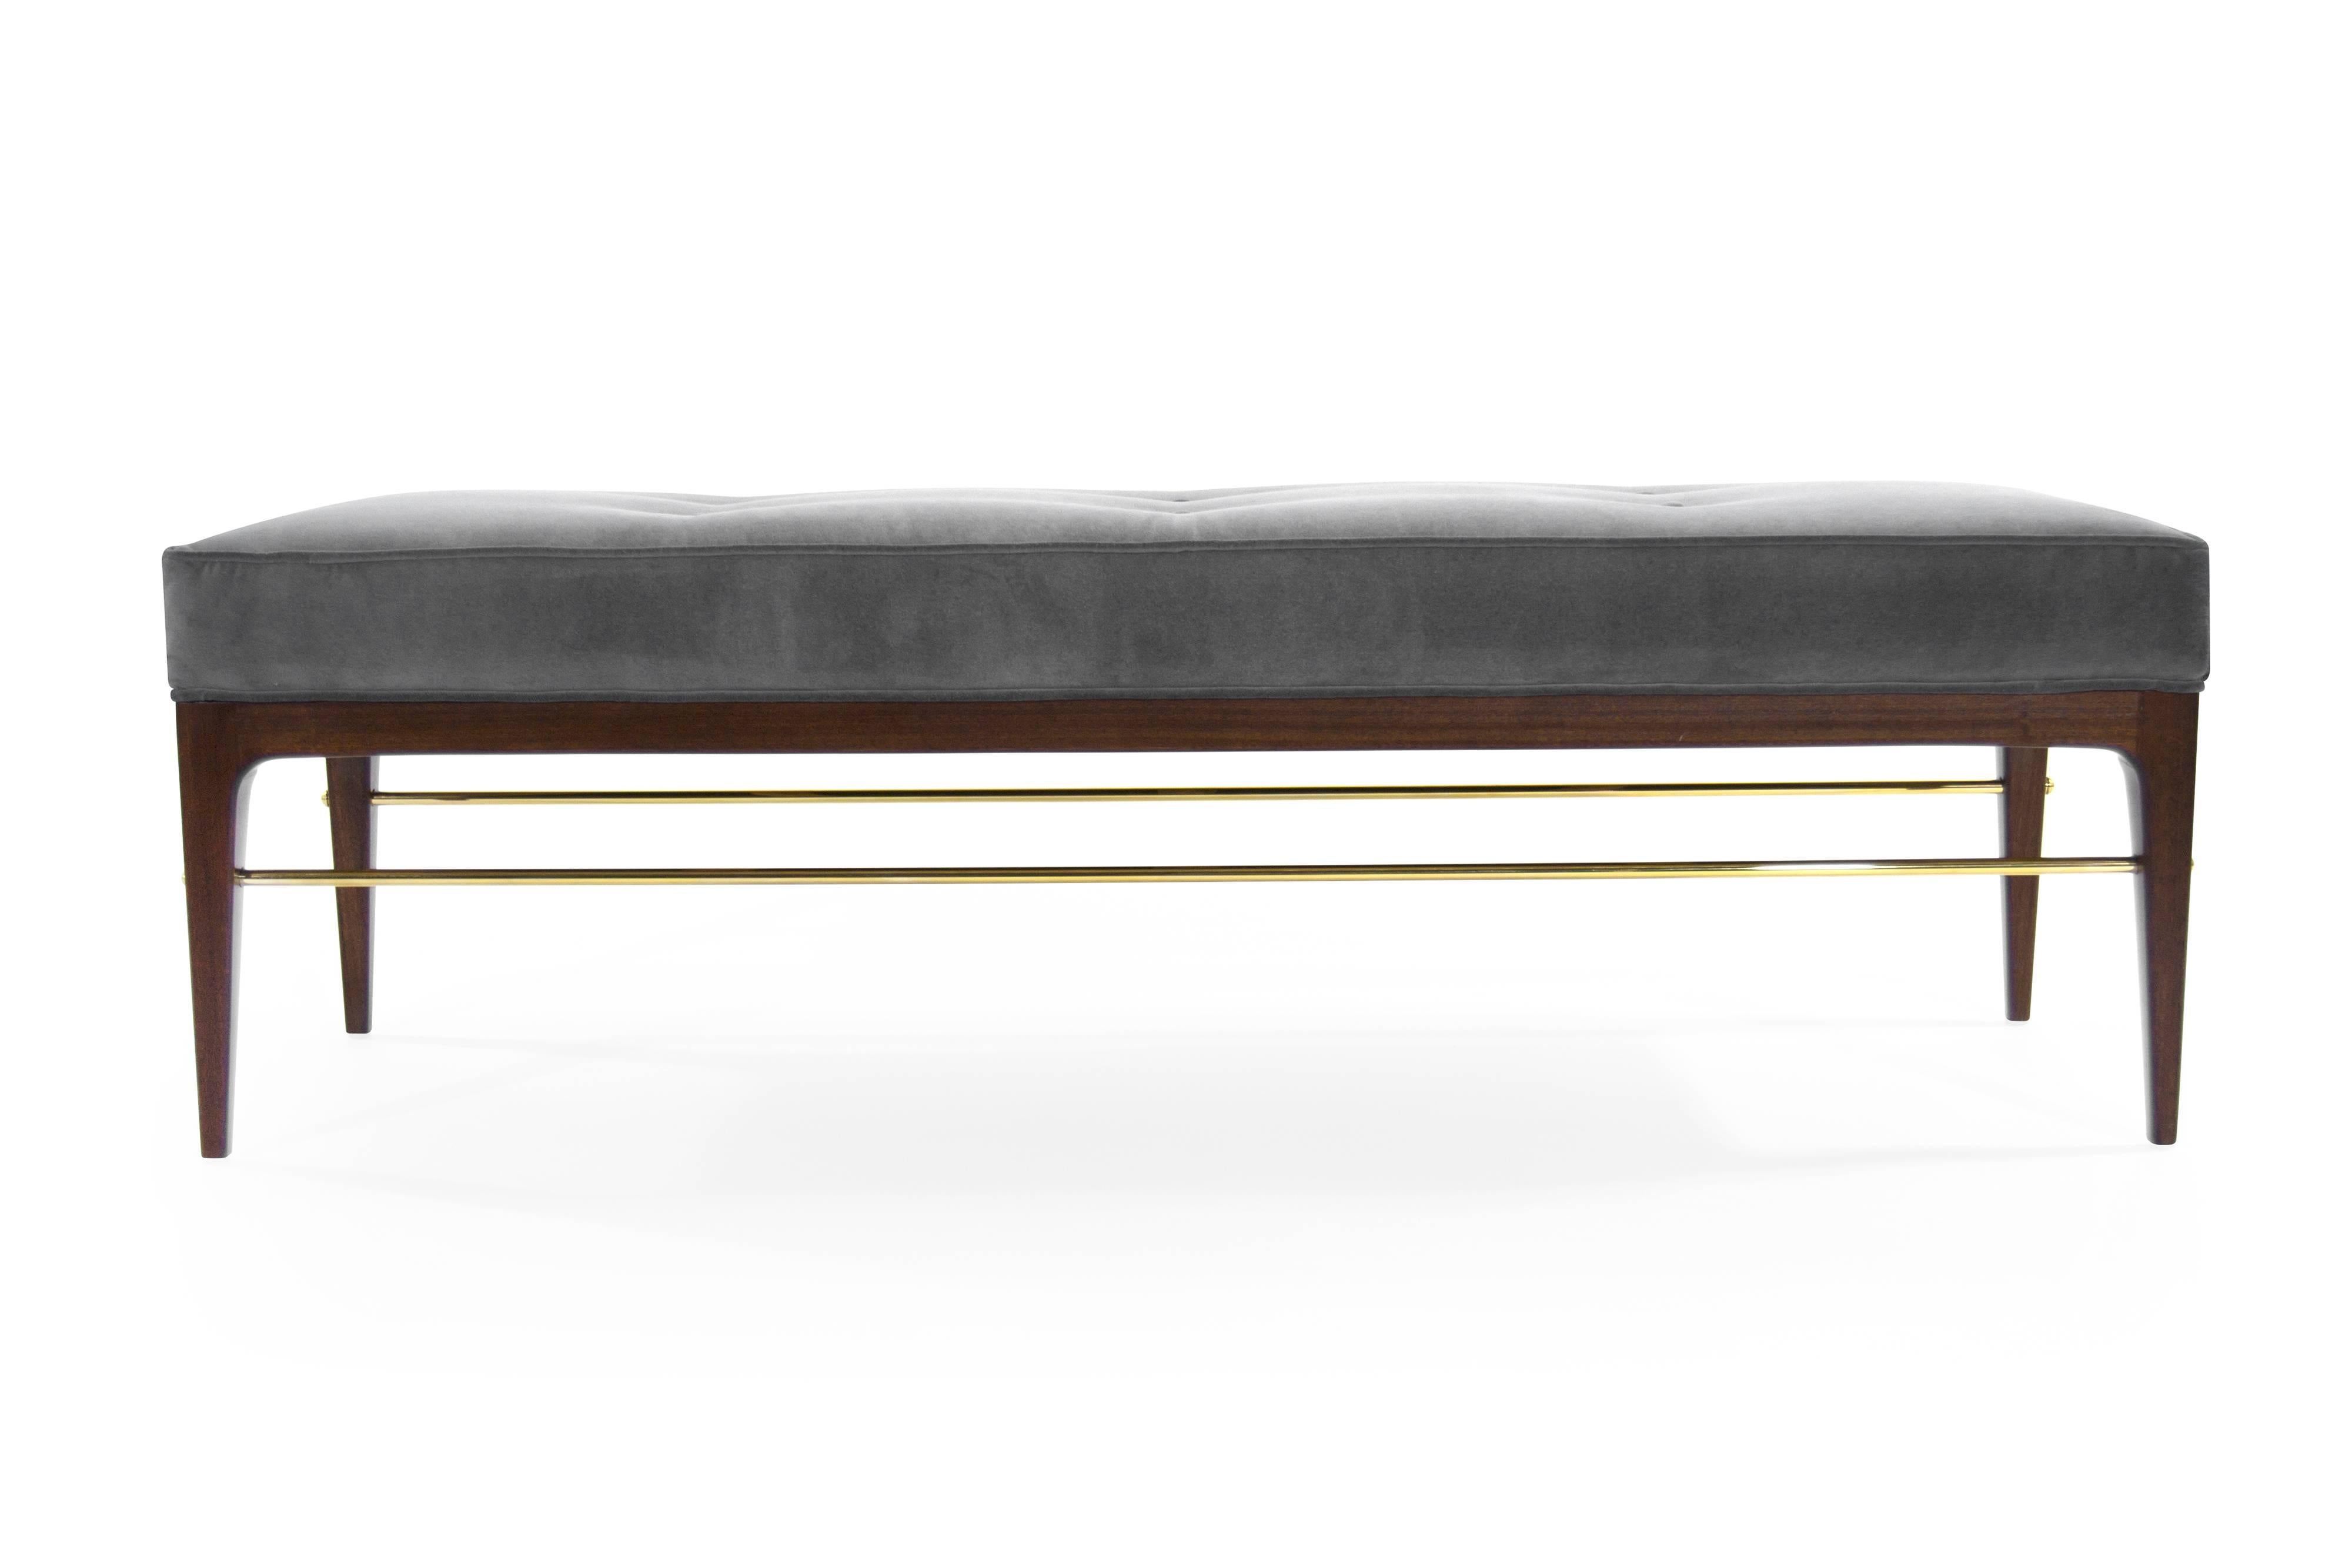 Midcentury inspired mahogany bench in the style of Edward Wormley and Paul McCobb.
Shown in solid mahogany, fitted with a brass stretcher, fastened in place by brass caps. Upholstered in granite velvet. Available immediately.
 